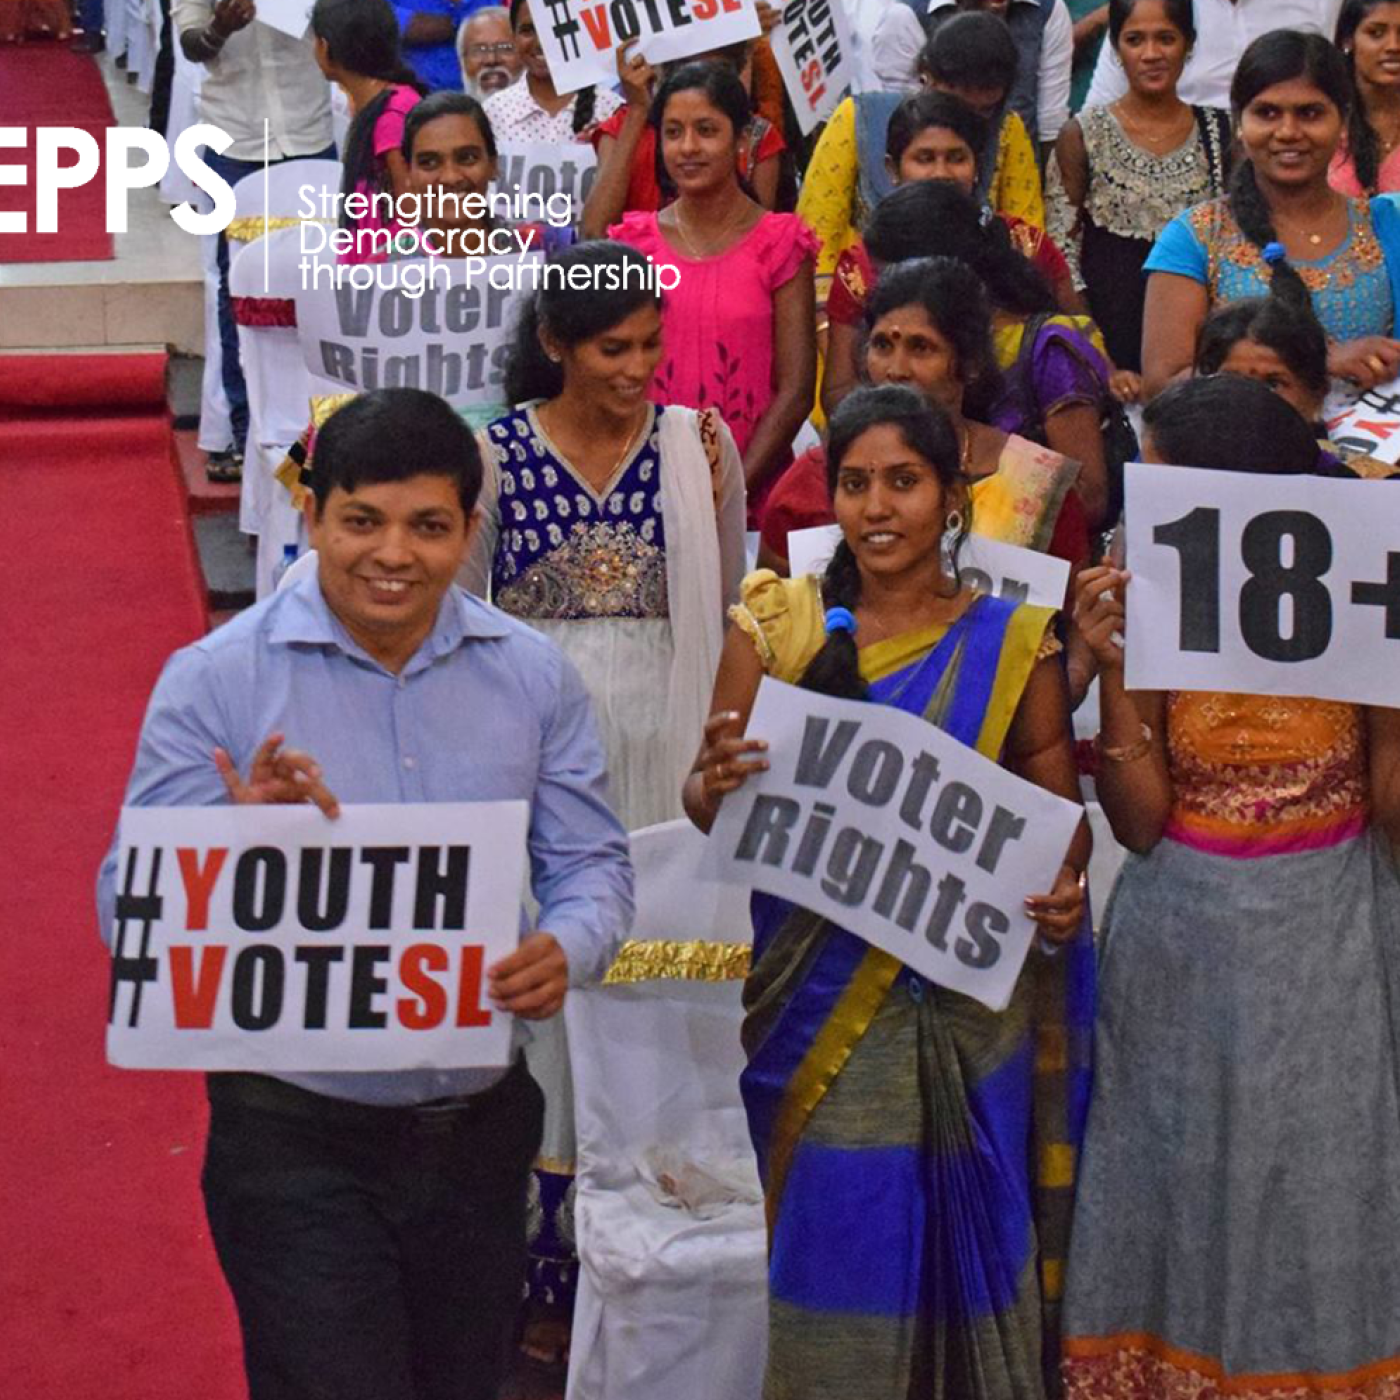 Youth advocate for voting rights with the Election Commission of Sri Lanka as part of IFES' #YouthVoteSL campaign.